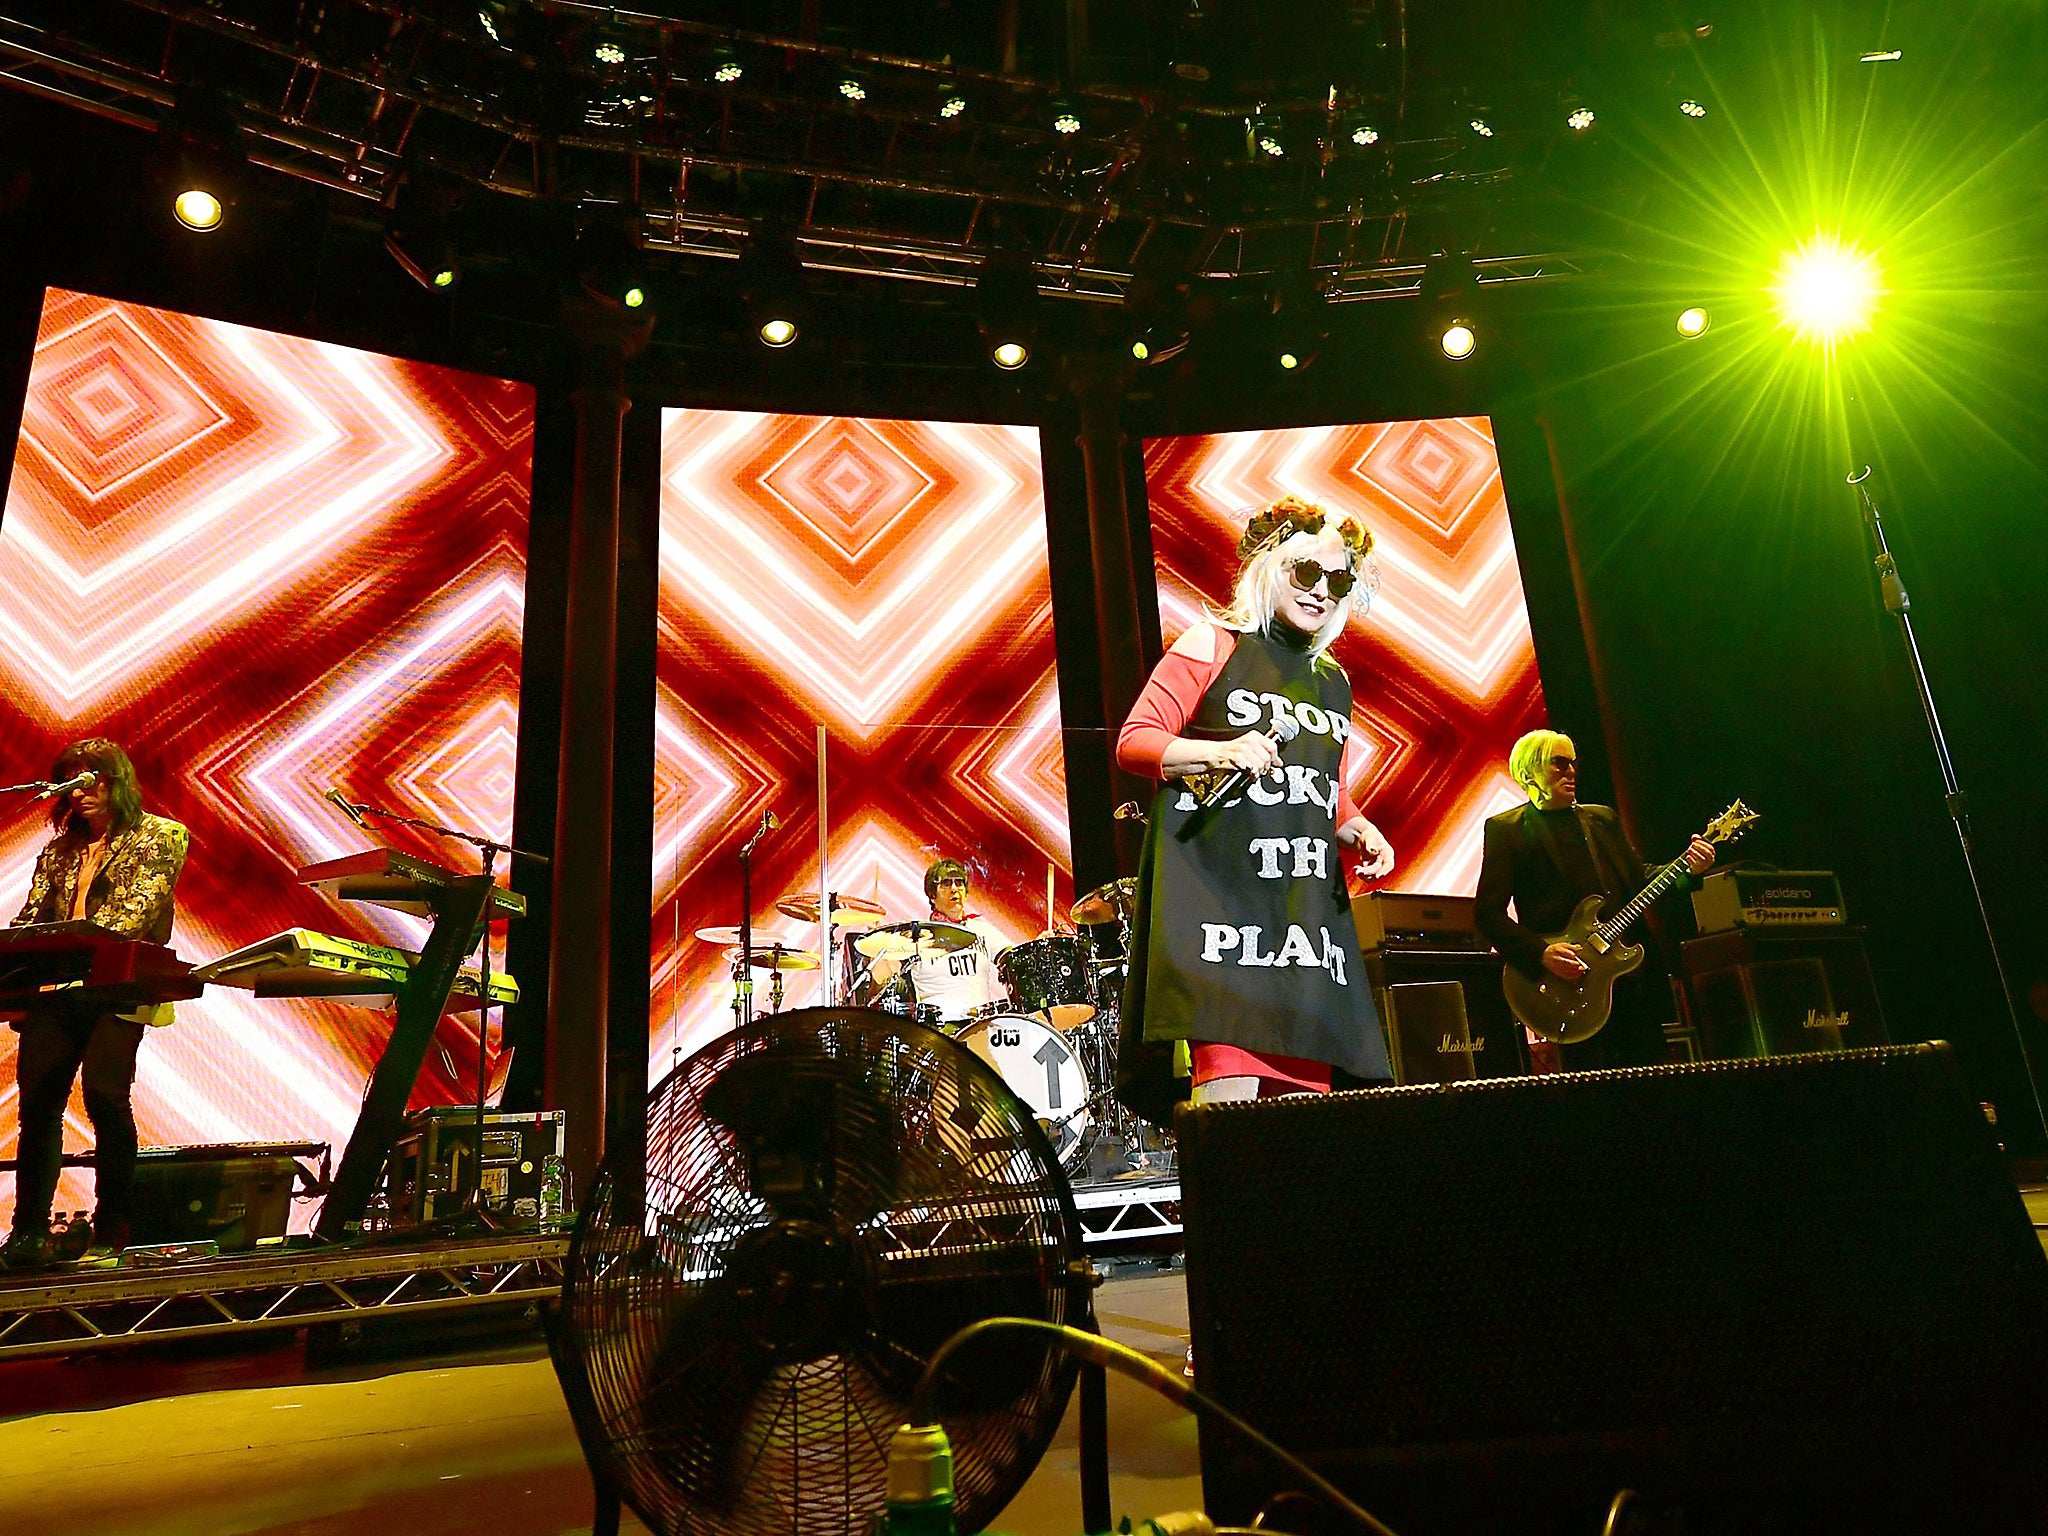 Debbie Harry of Blondie performs on stage at the Roundhouse, London, to promote their new album Pollinator